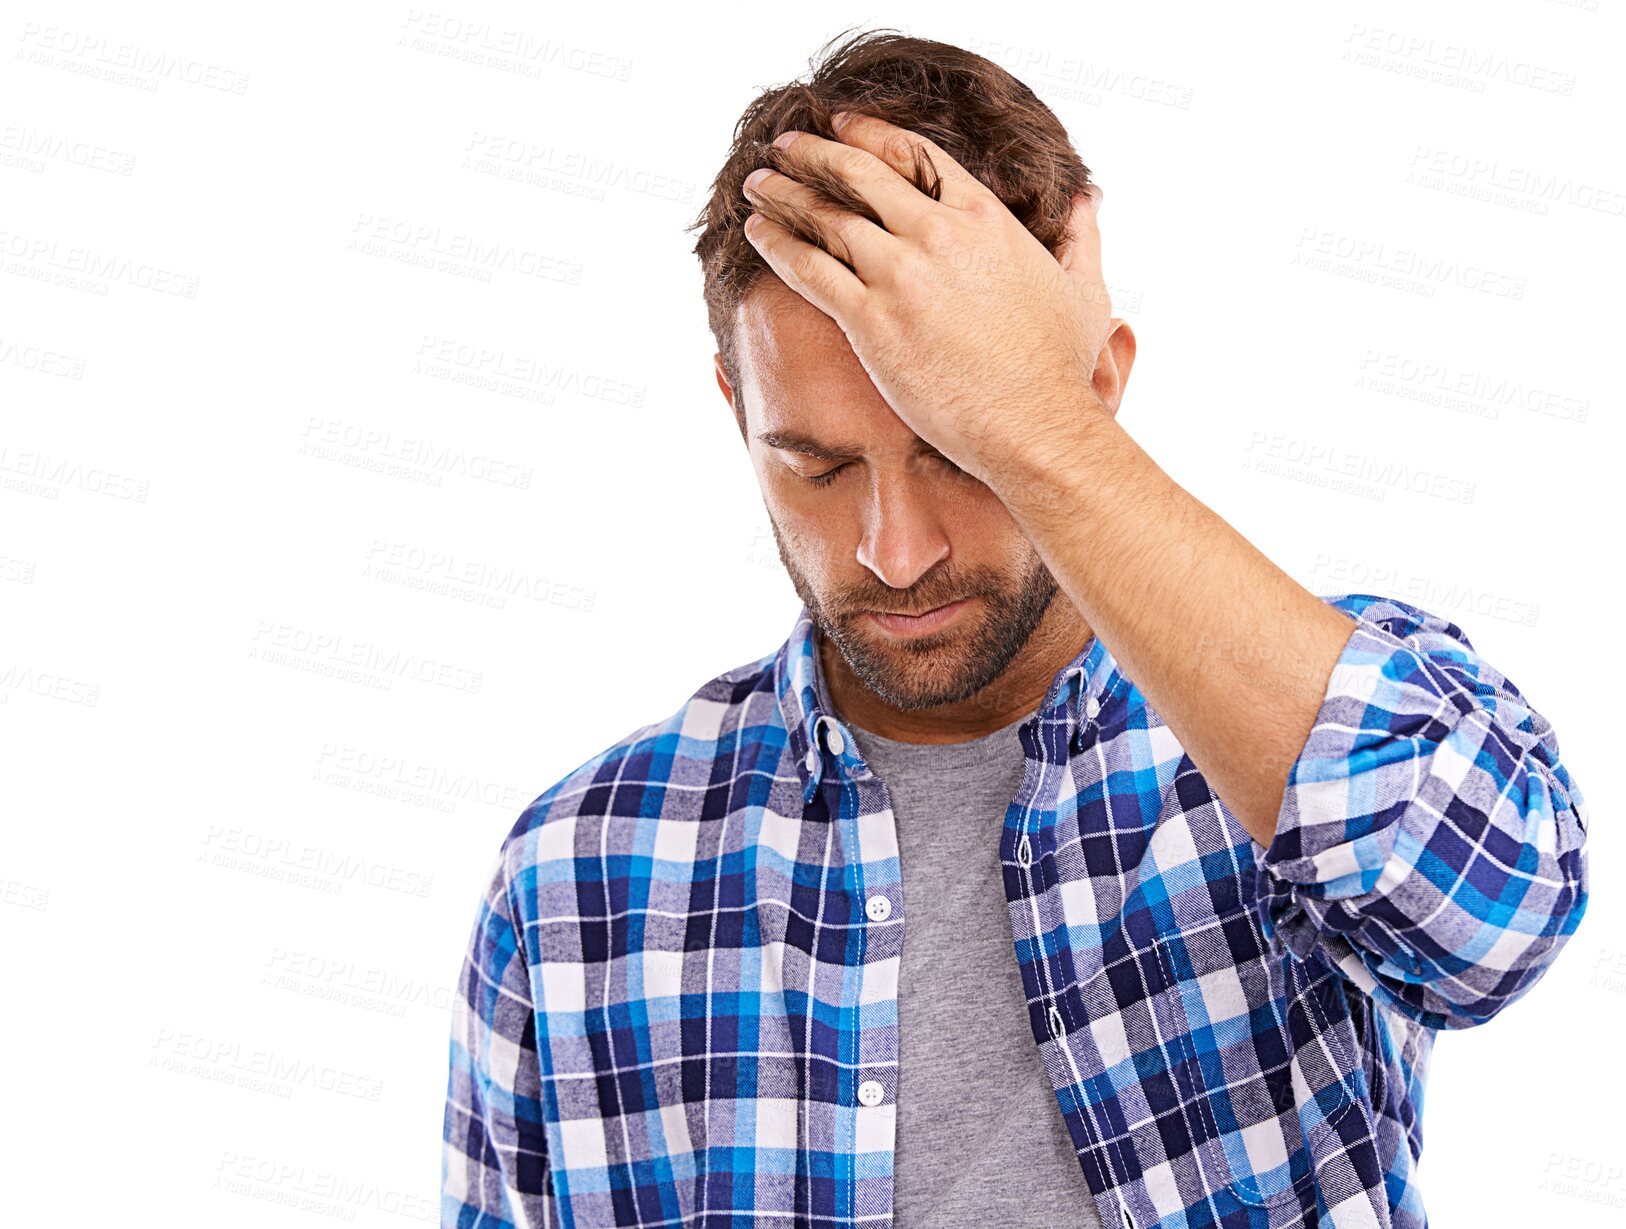 Buy stock photo Headache, anxiety and a man with a mistake or problem isolated on a transparent png background. Sad, depressed and a tired person with a migraine or pain from insomnia, depression or frustrated